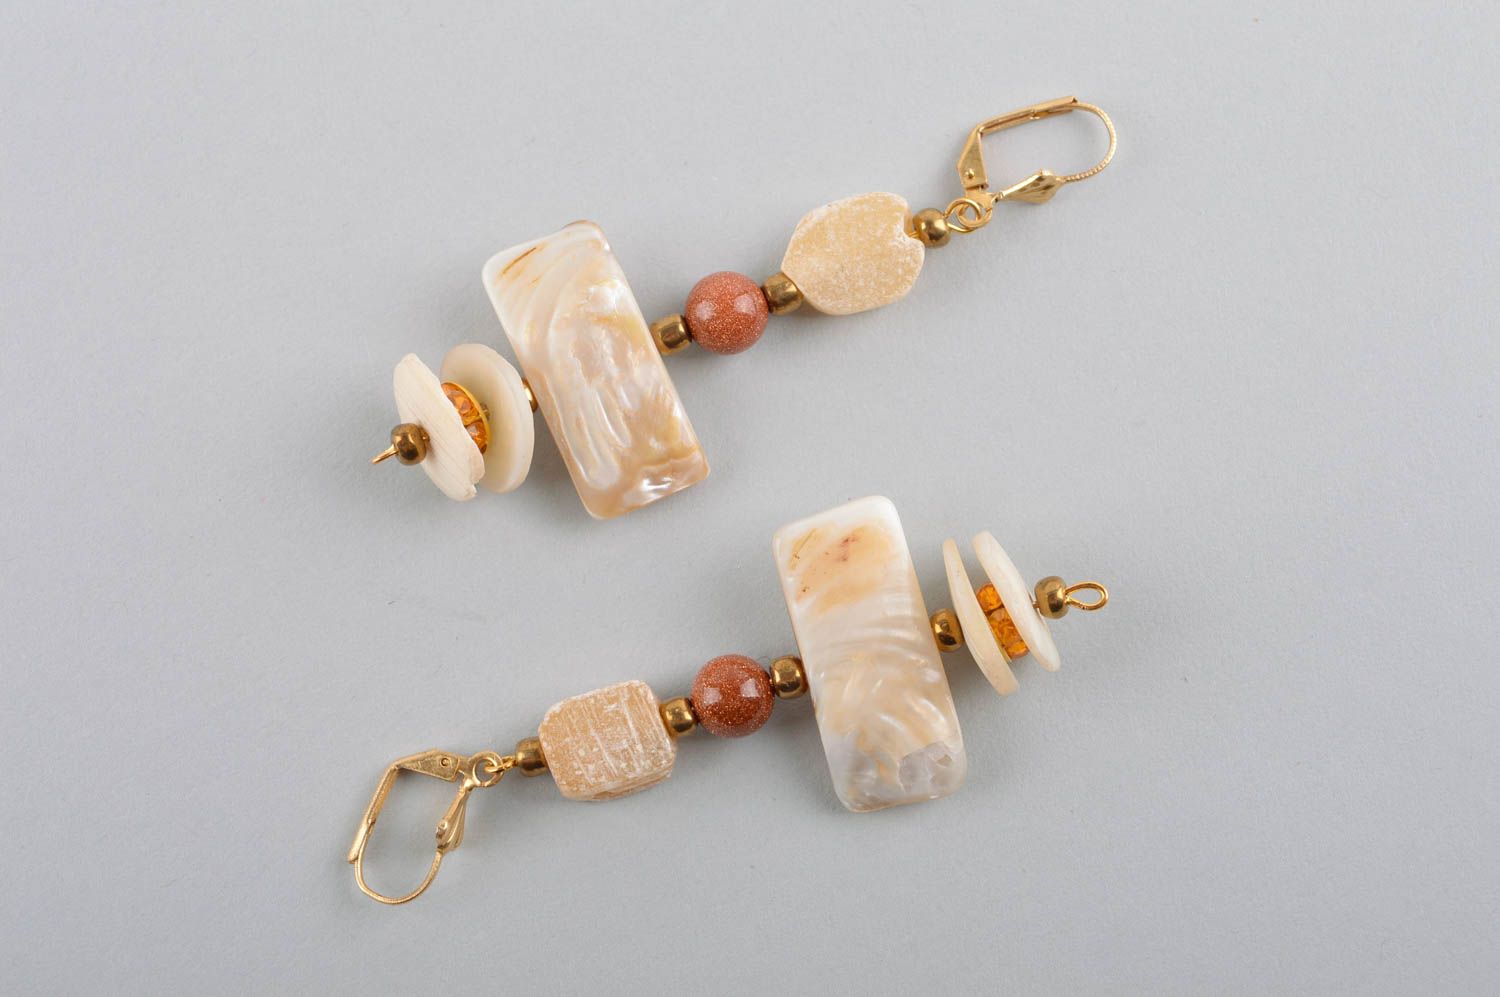 Handmade earrings with natural stones long earrings with charms stone jewelry photo 5